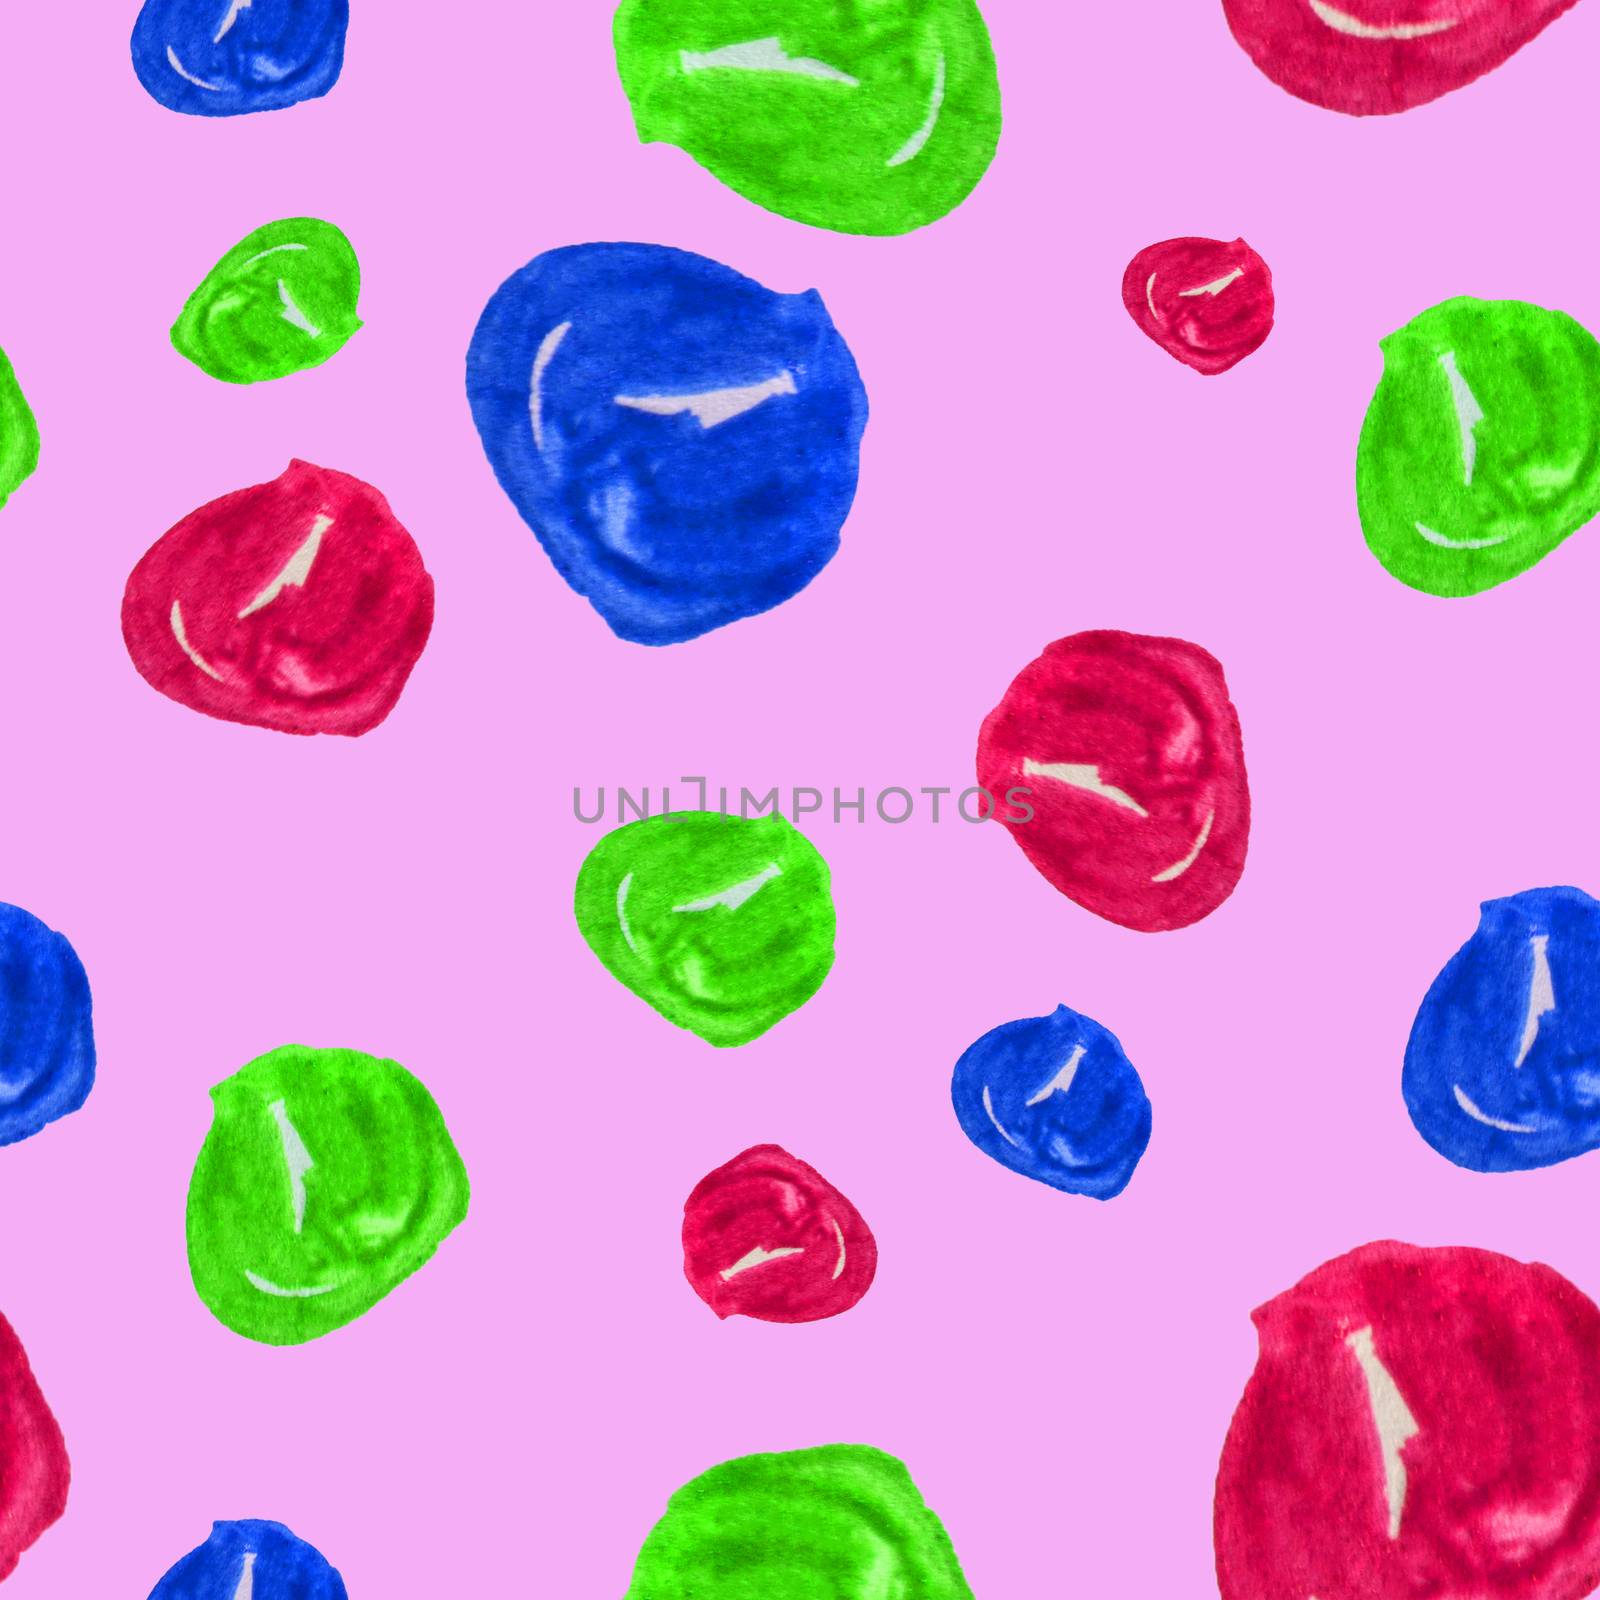 Hand drawn seamless watercolor background illustration of colorful beads on bright pink background. Colorful illustration with decorative Wallpaper.